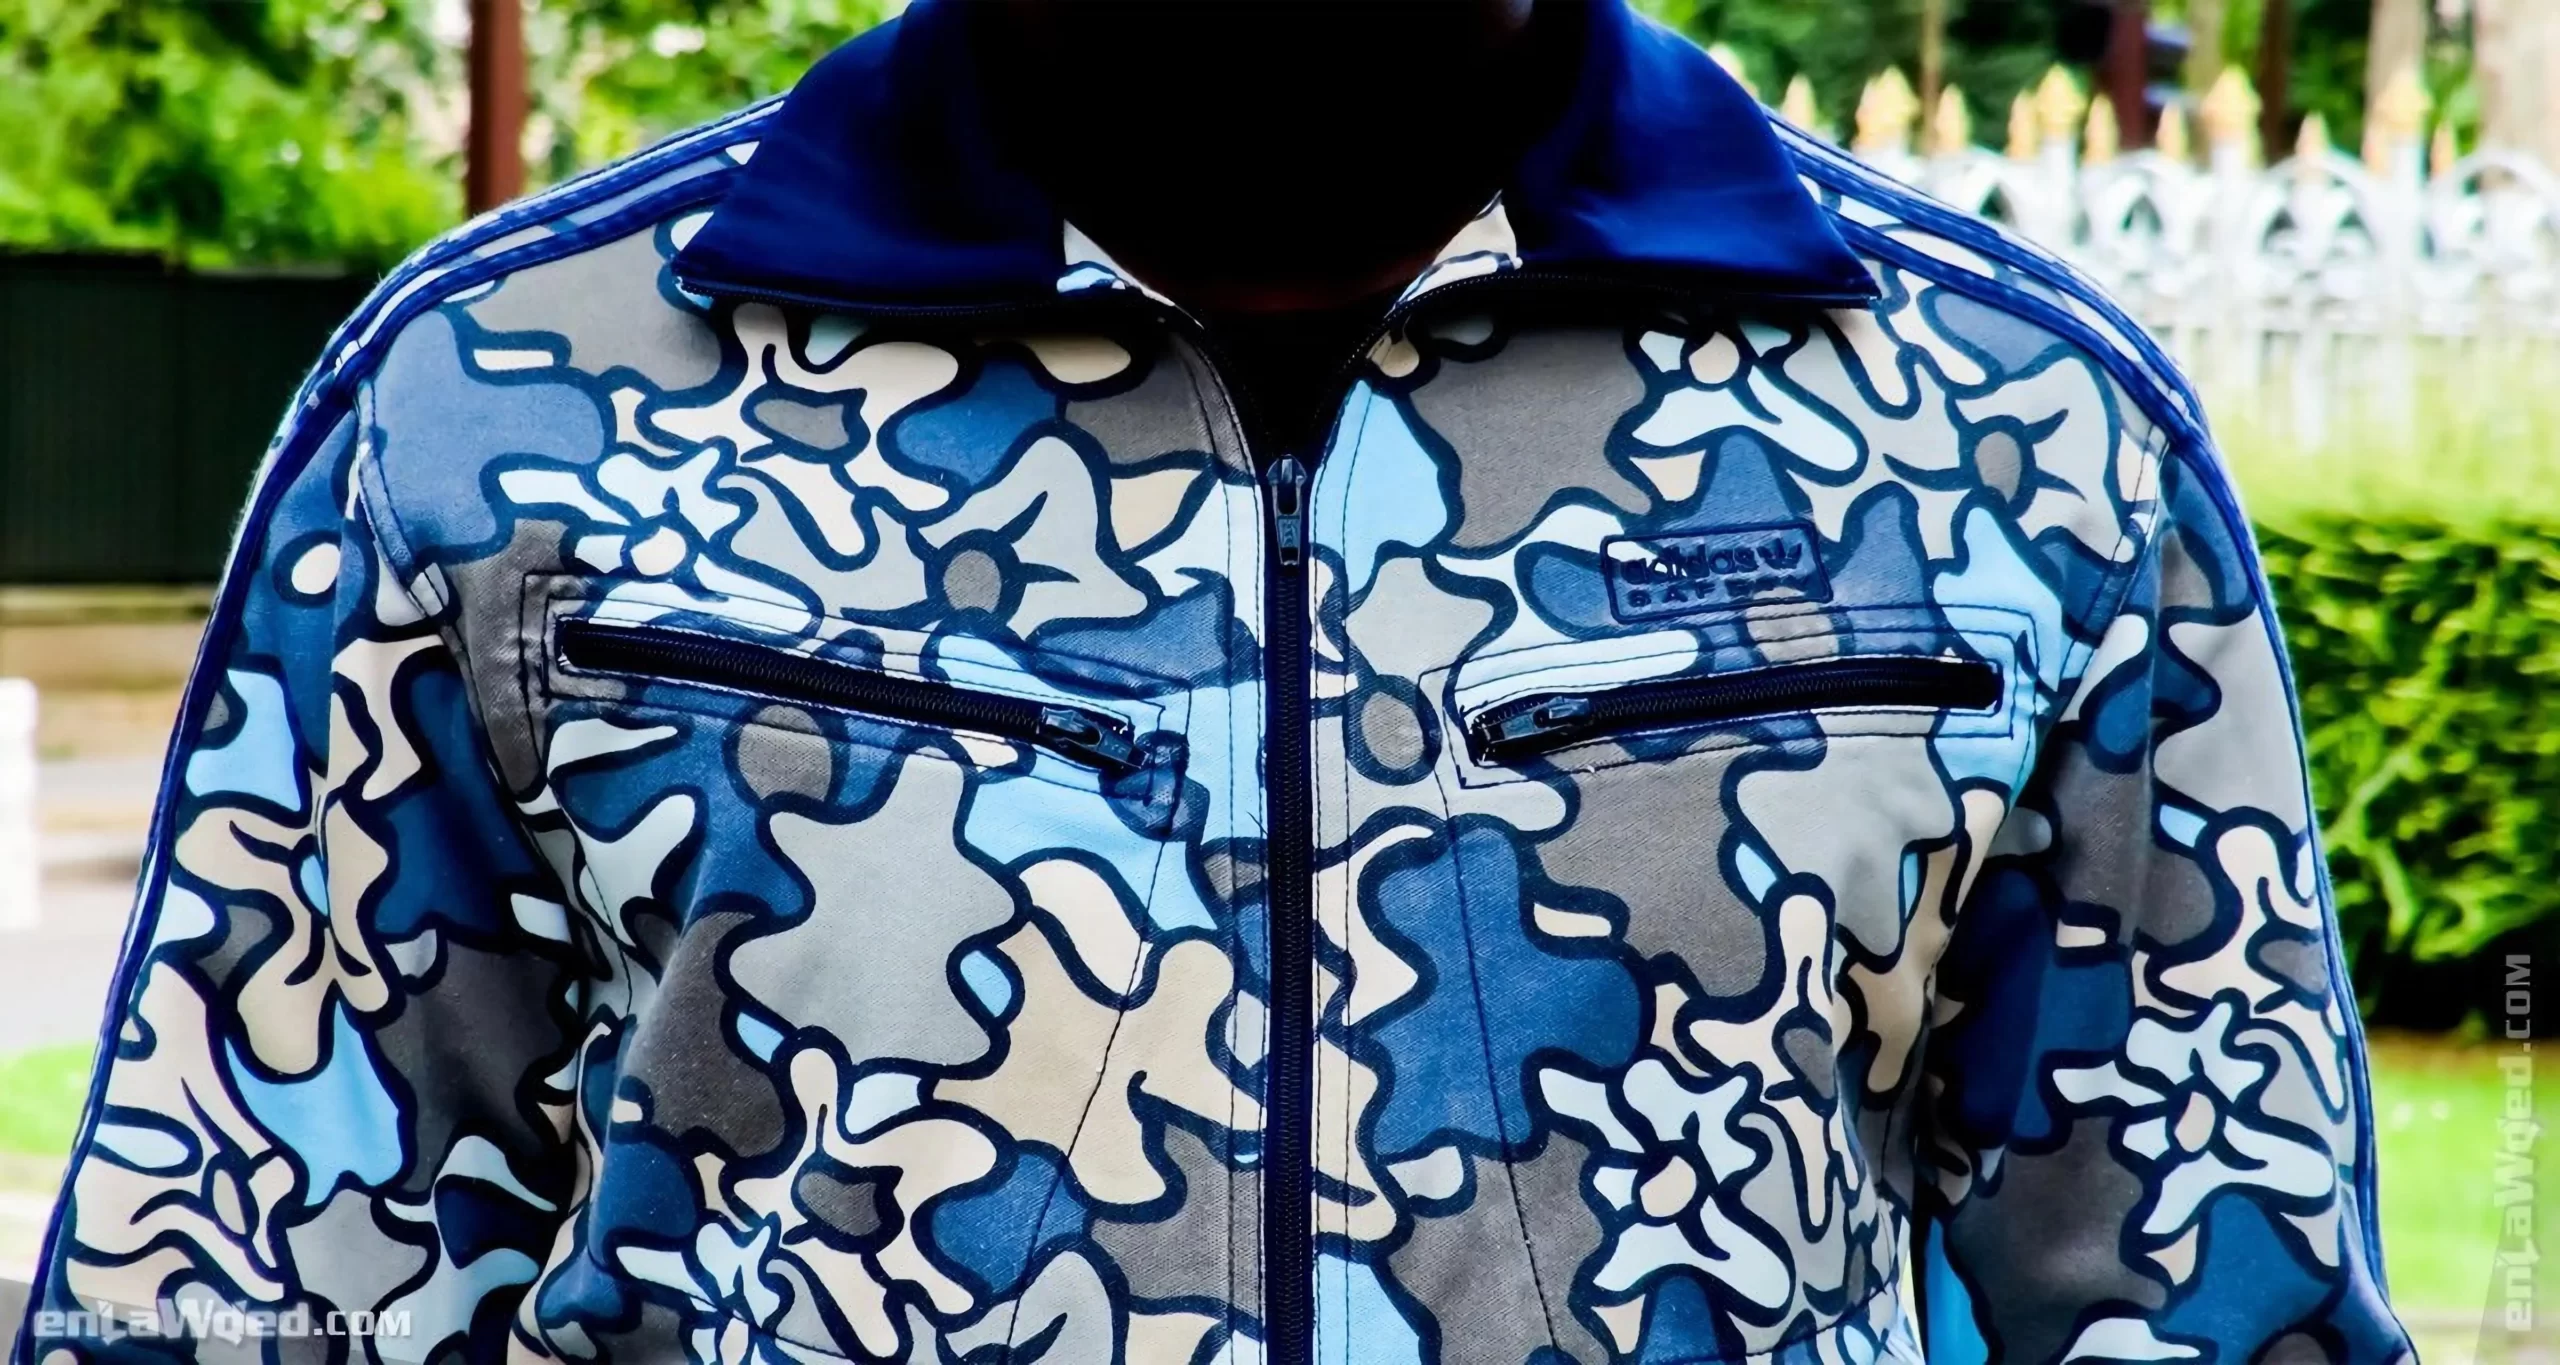 Men’s 2006 Adidas Originals Blue Safety Camo Track Top: Colossal (EnLawded.com file #lmchjtgmxqi2bpoo2rs)